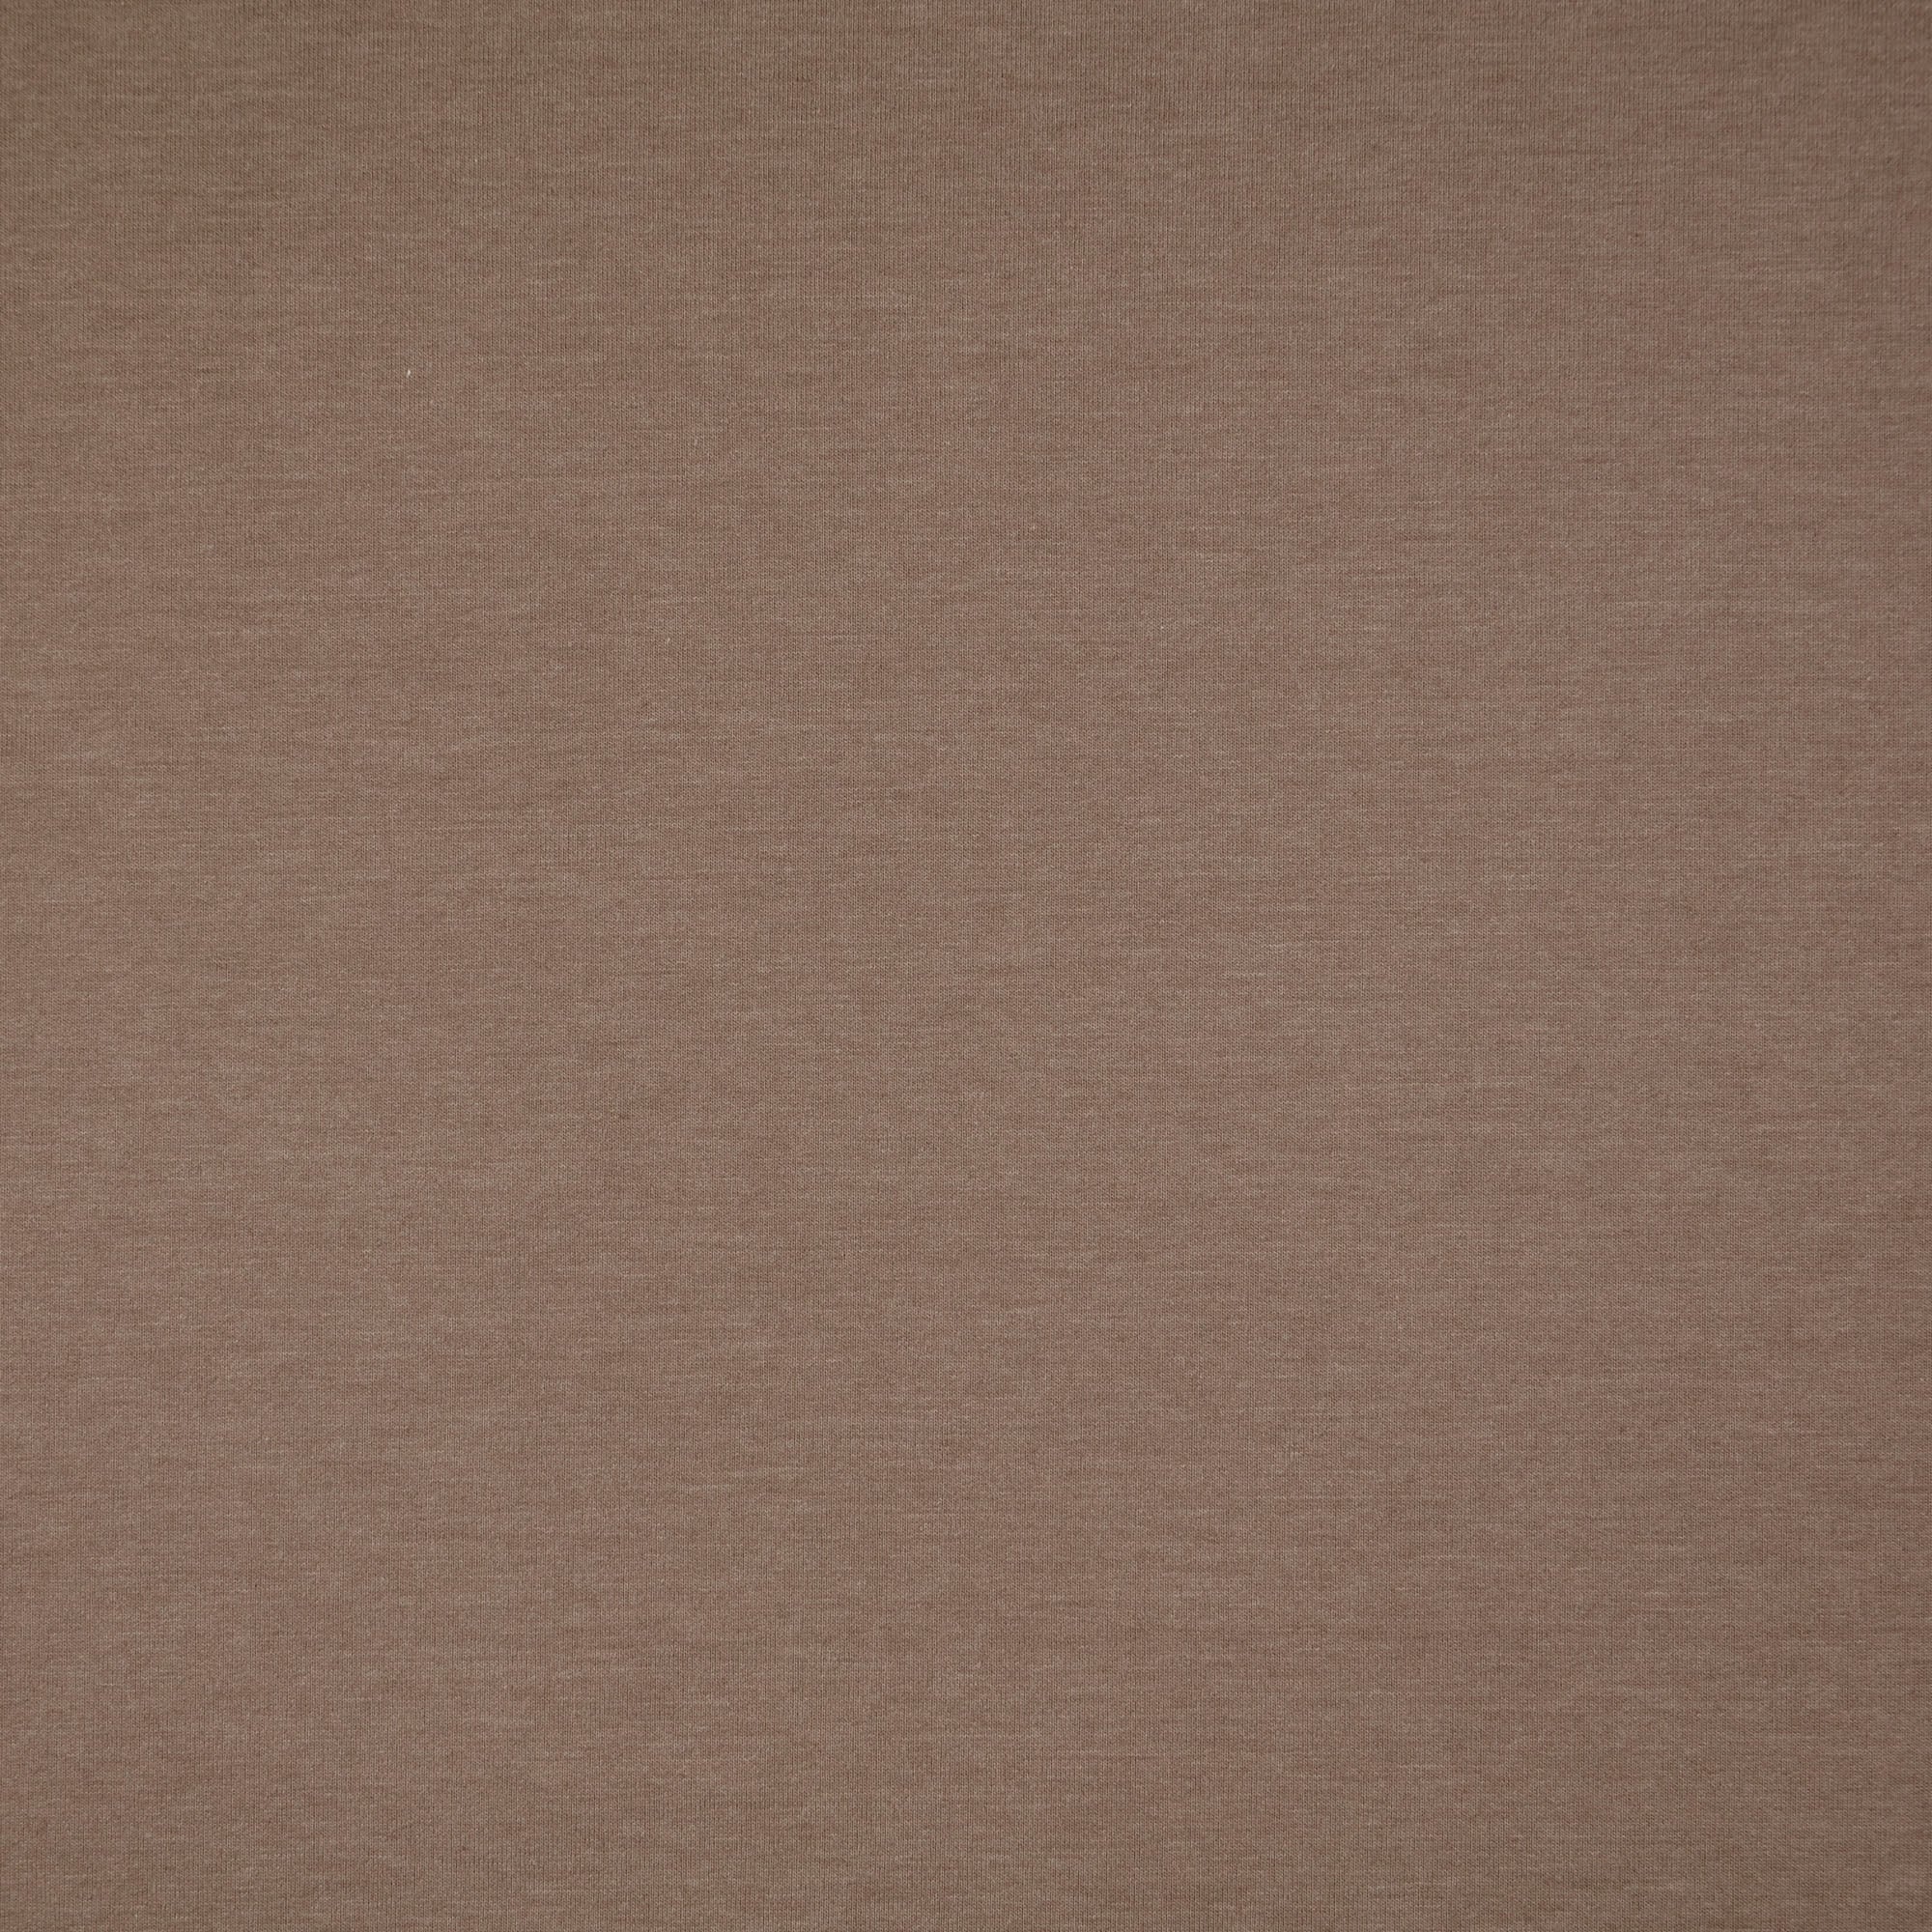 Allure Taupe Soft Single Knit Fabric